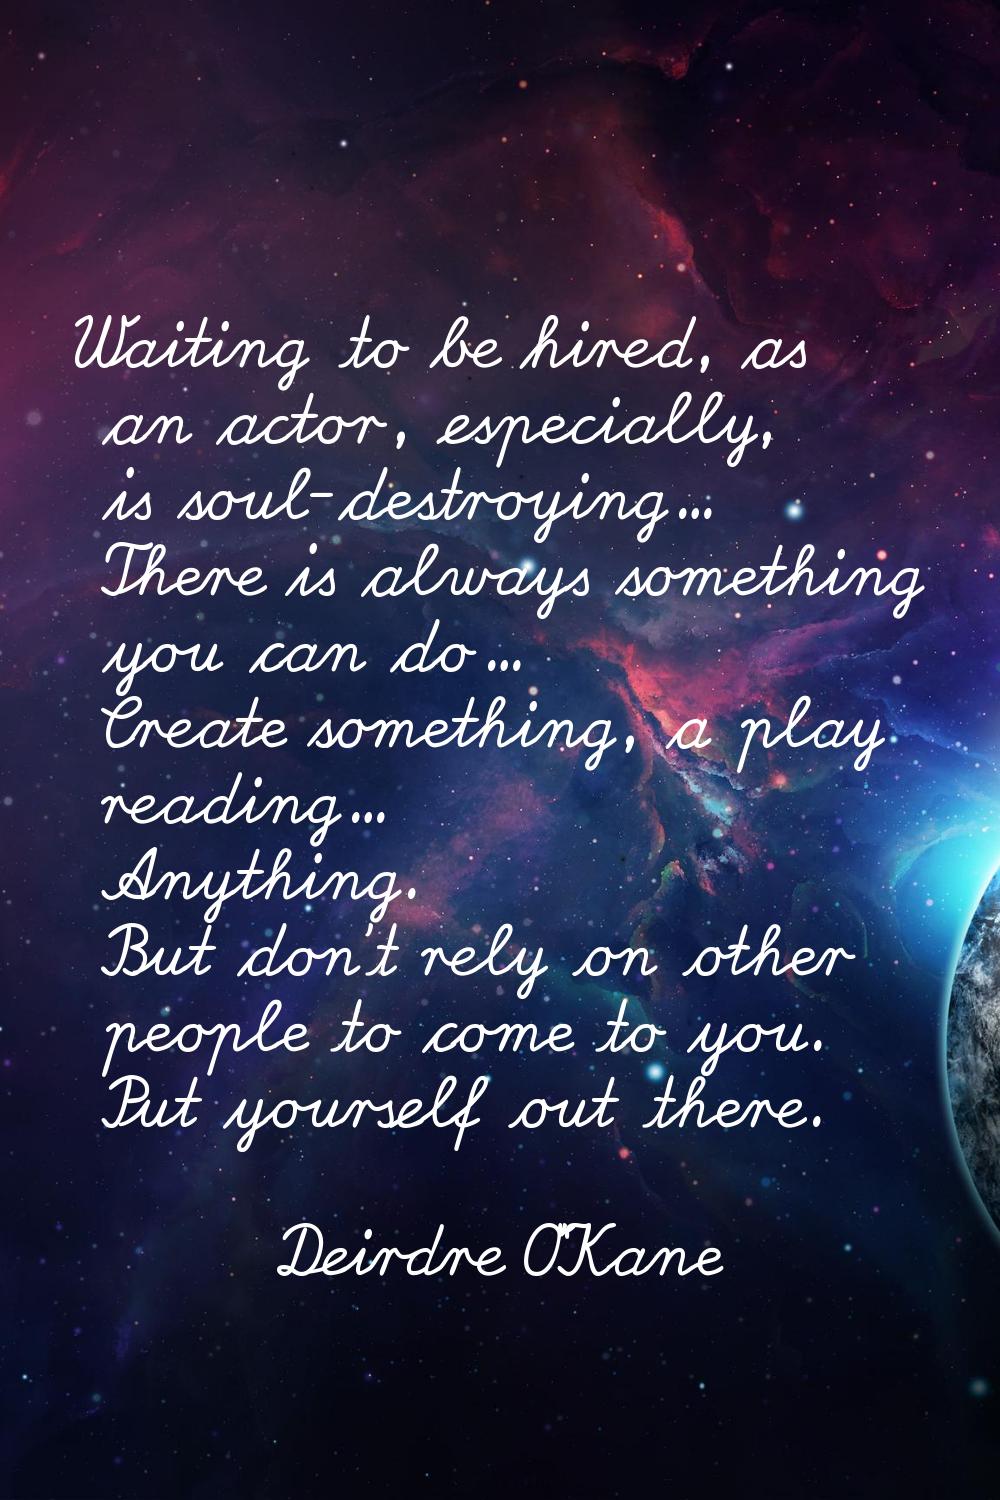 Waiting to be hired, as an actor, especially, is soul-destroying... There is always something you c